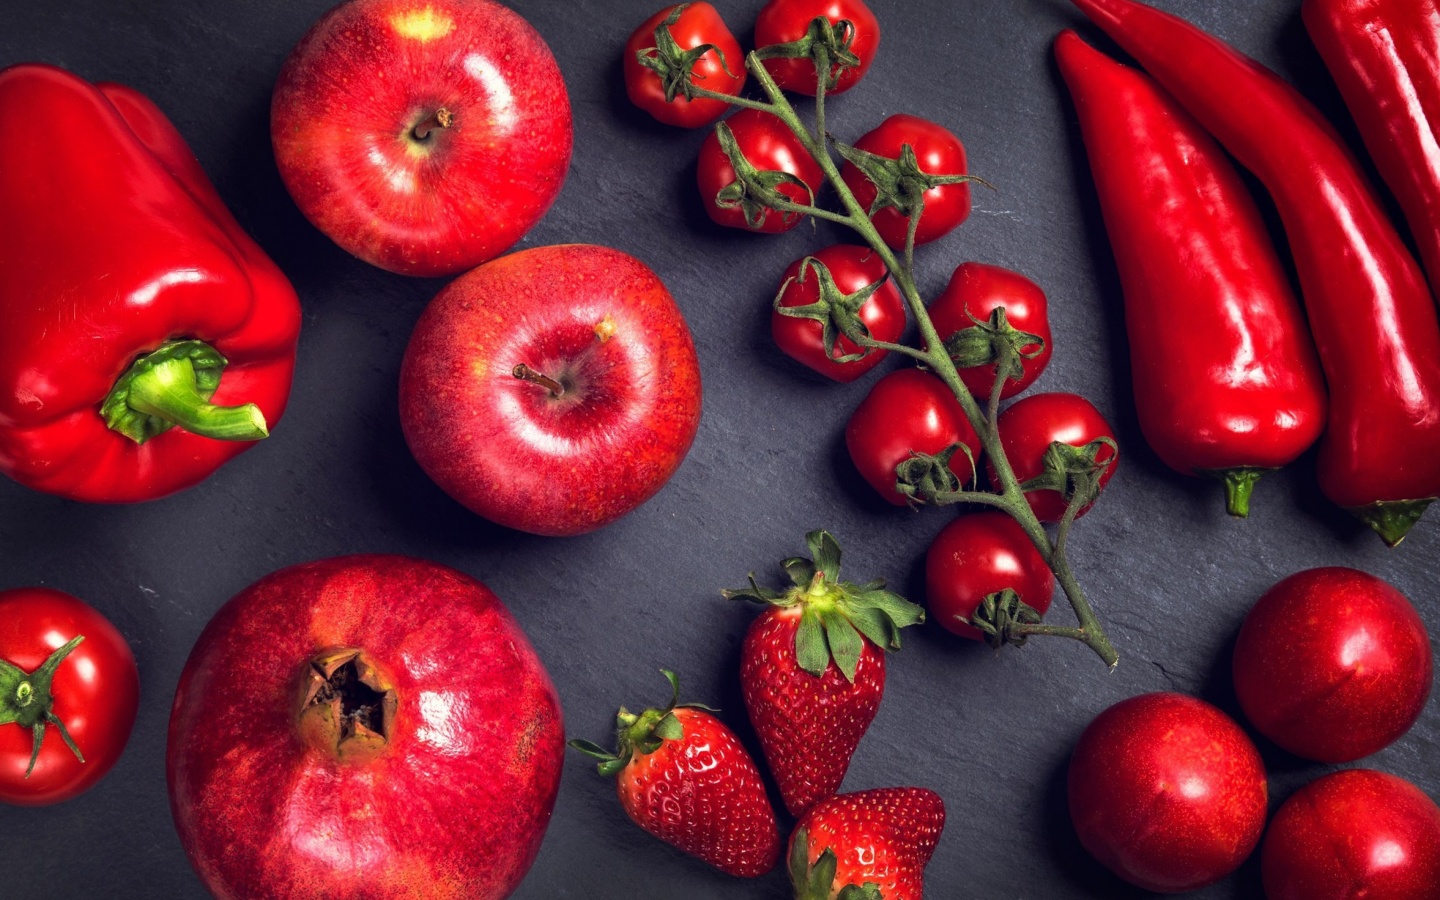 Red fruits and vegetables screenshot #1 1440x900